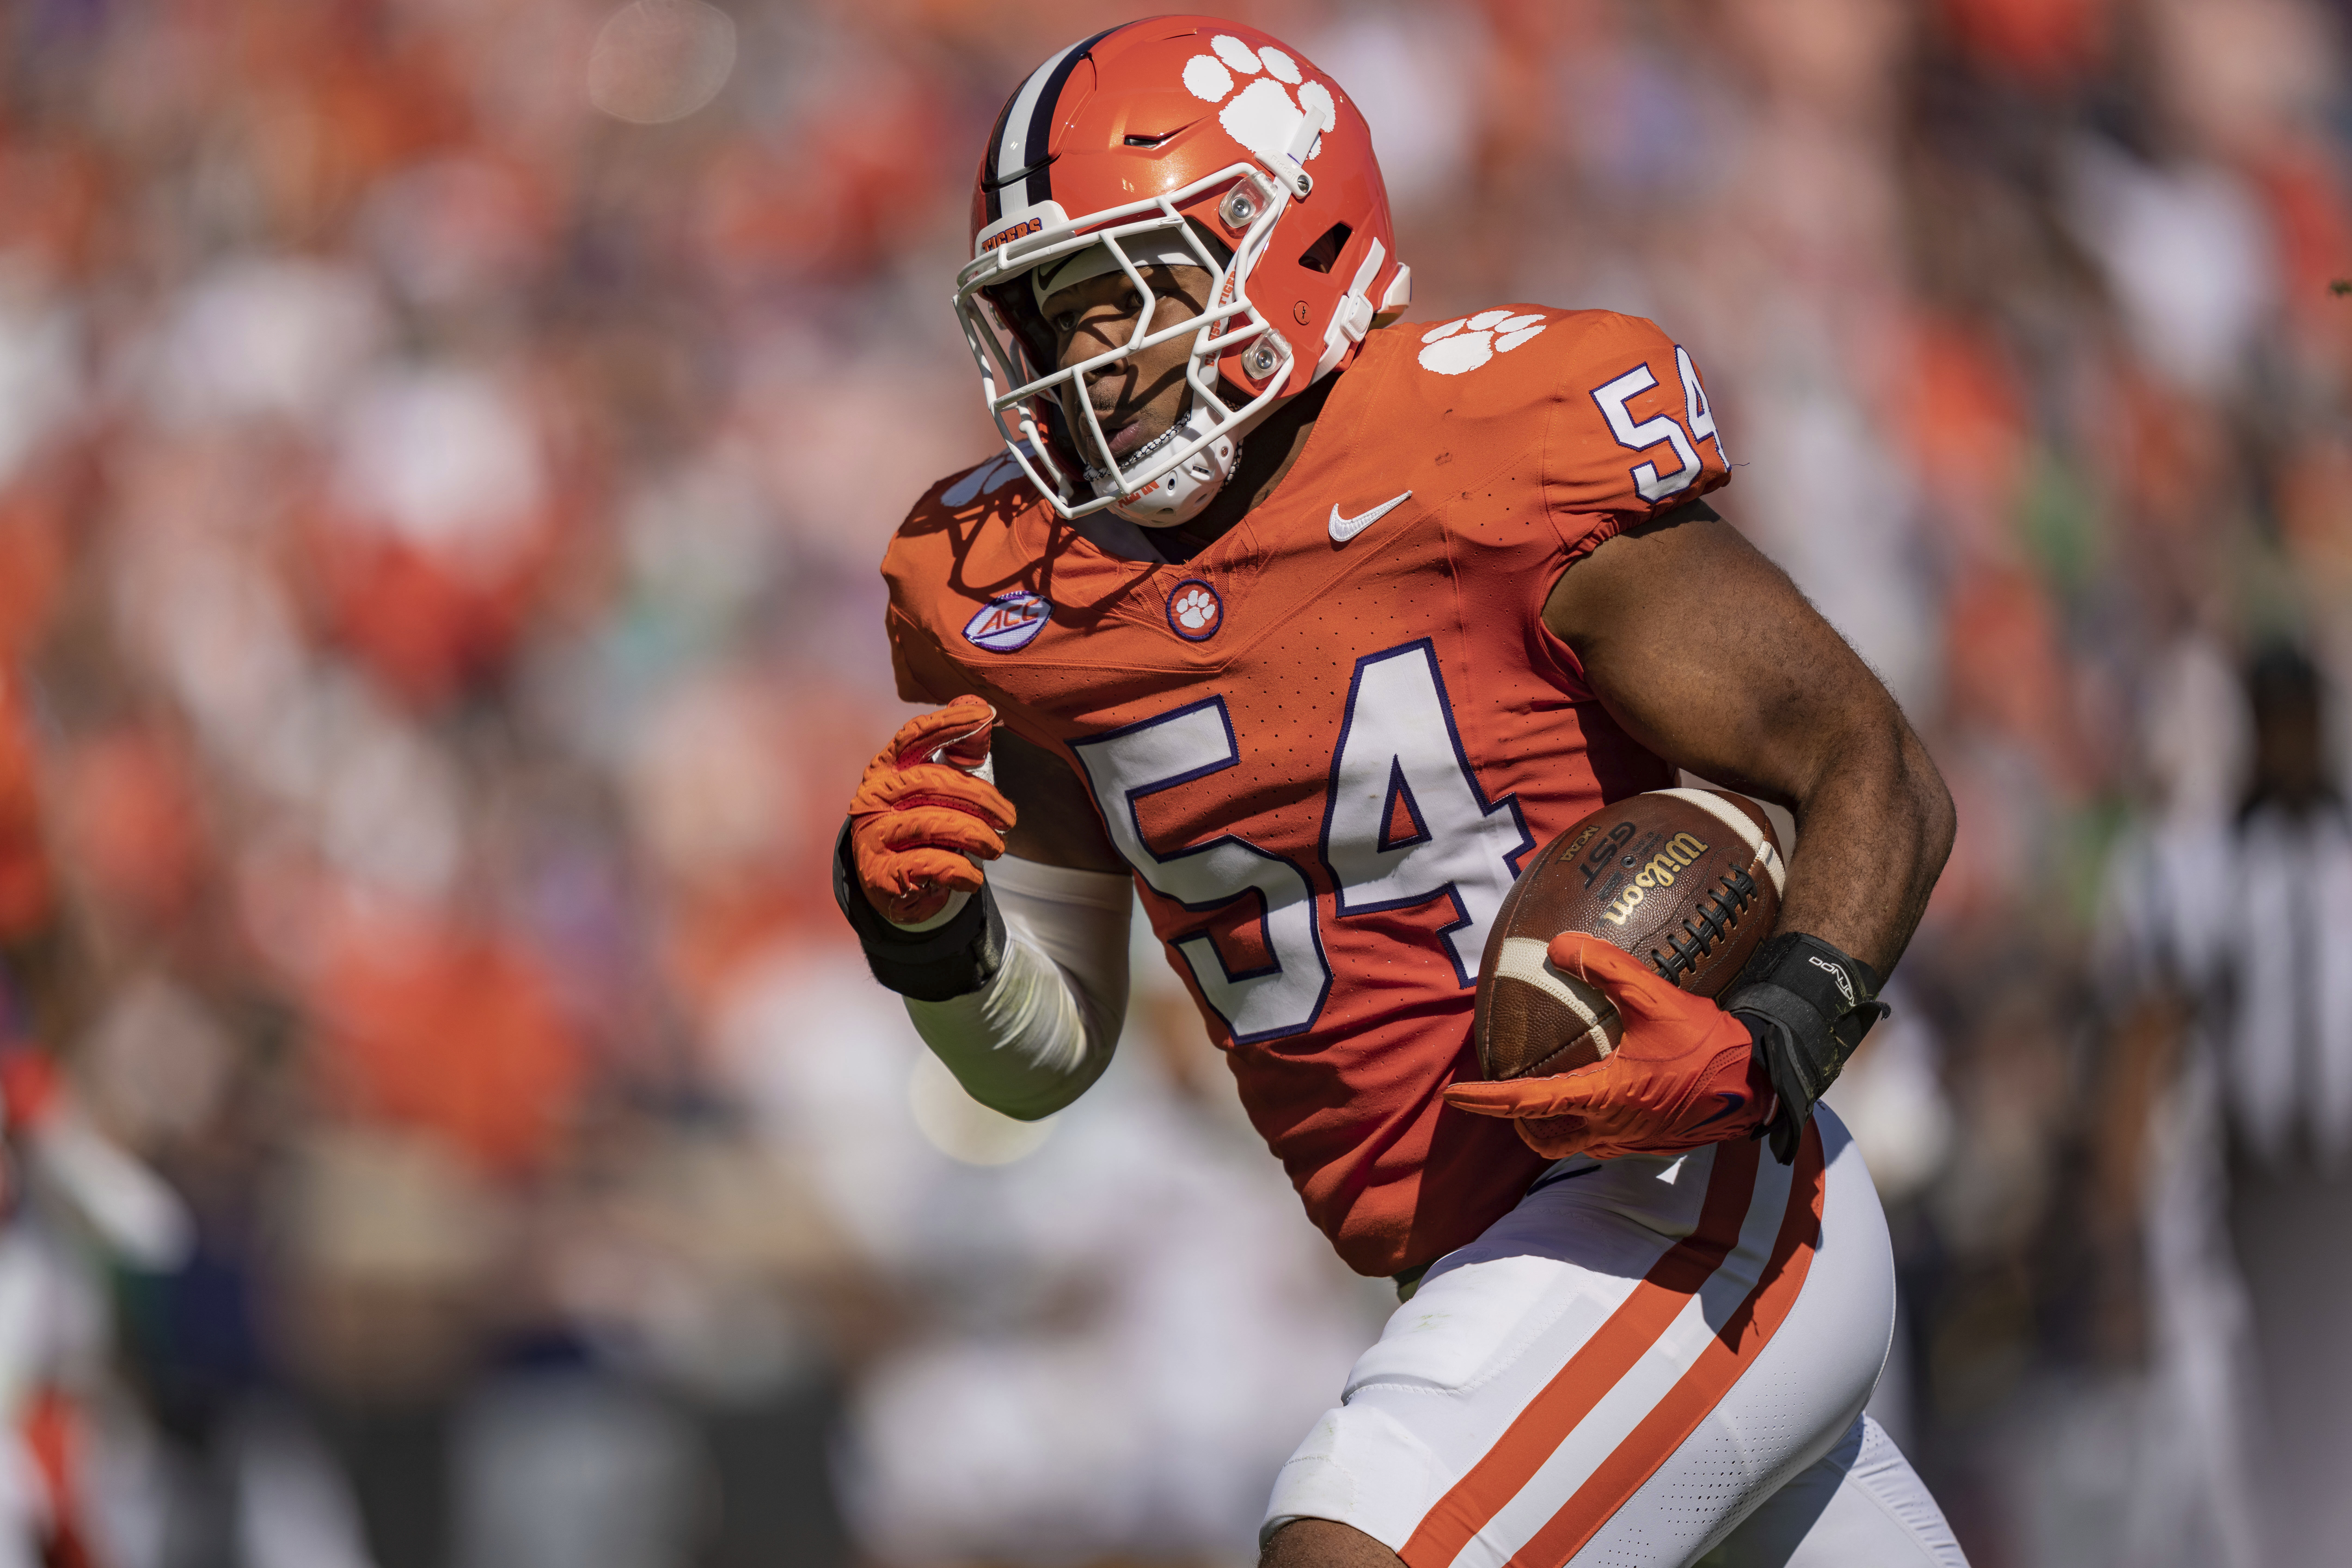 <h3>Round 3 (78th overall) — Jeremiah Trotter Jr., LB Clemson</h3>
<p>Twenty years after his dad was released following a disappointing two-year stint with the Burgundy and Gold, Junior comes to restore Washington&#8217;s faith in the Trotter name.</p>
<p>As you would expect from a second-generation NFLer, Trotter Jr. has a high football IQ and was a tackling machine in college. He&#8217;s a tad undersized but with Bobby Wagner already the starting middle linebacker, Trotter has the perfect mentor to usher him into NFL productivity.</p>
